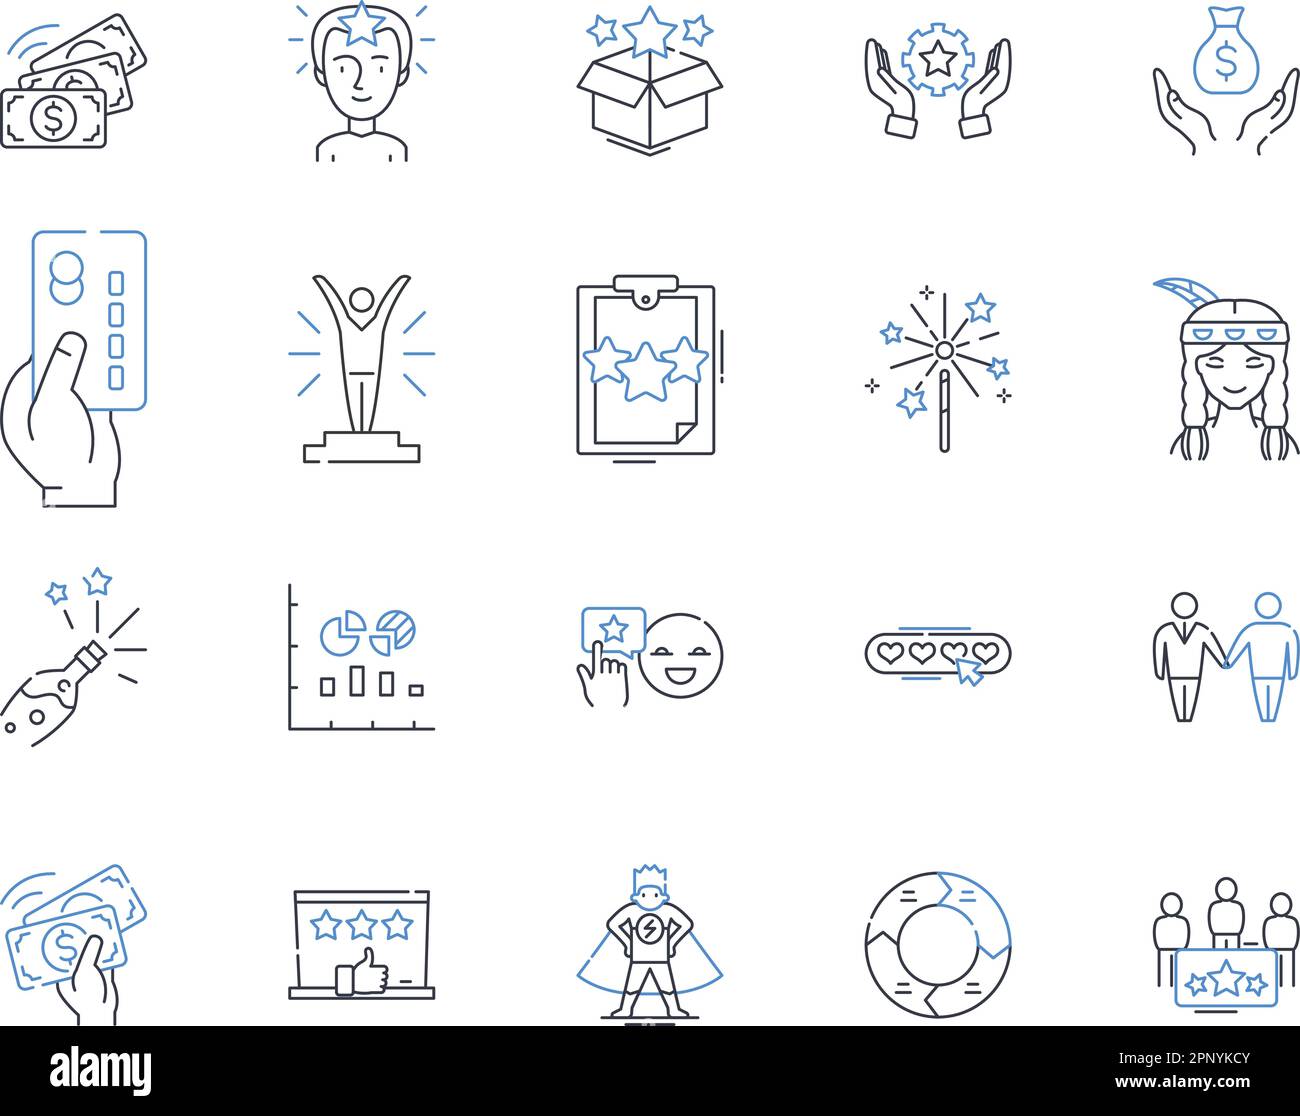 Debt management line icons collection. Consolidation, Credit, Budgeting, Recovery, Counseling, Reduction, Solutions vector and linear illustration Stock Vector